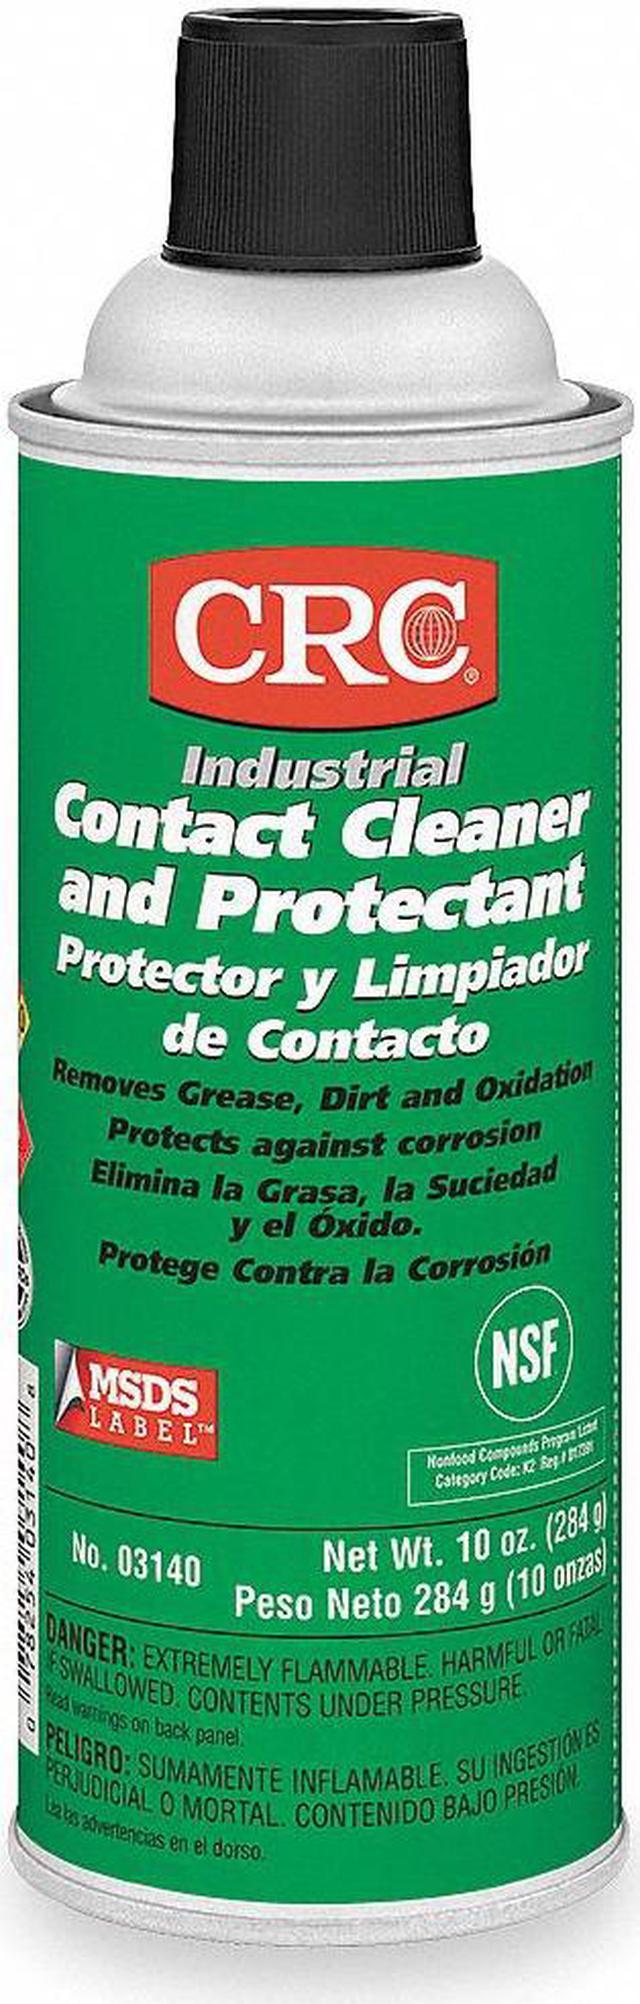 CRC Contact Cleaner and Protectant, 10 oz Aerosol Can, Unscented Liquid, 1  EA - 3140